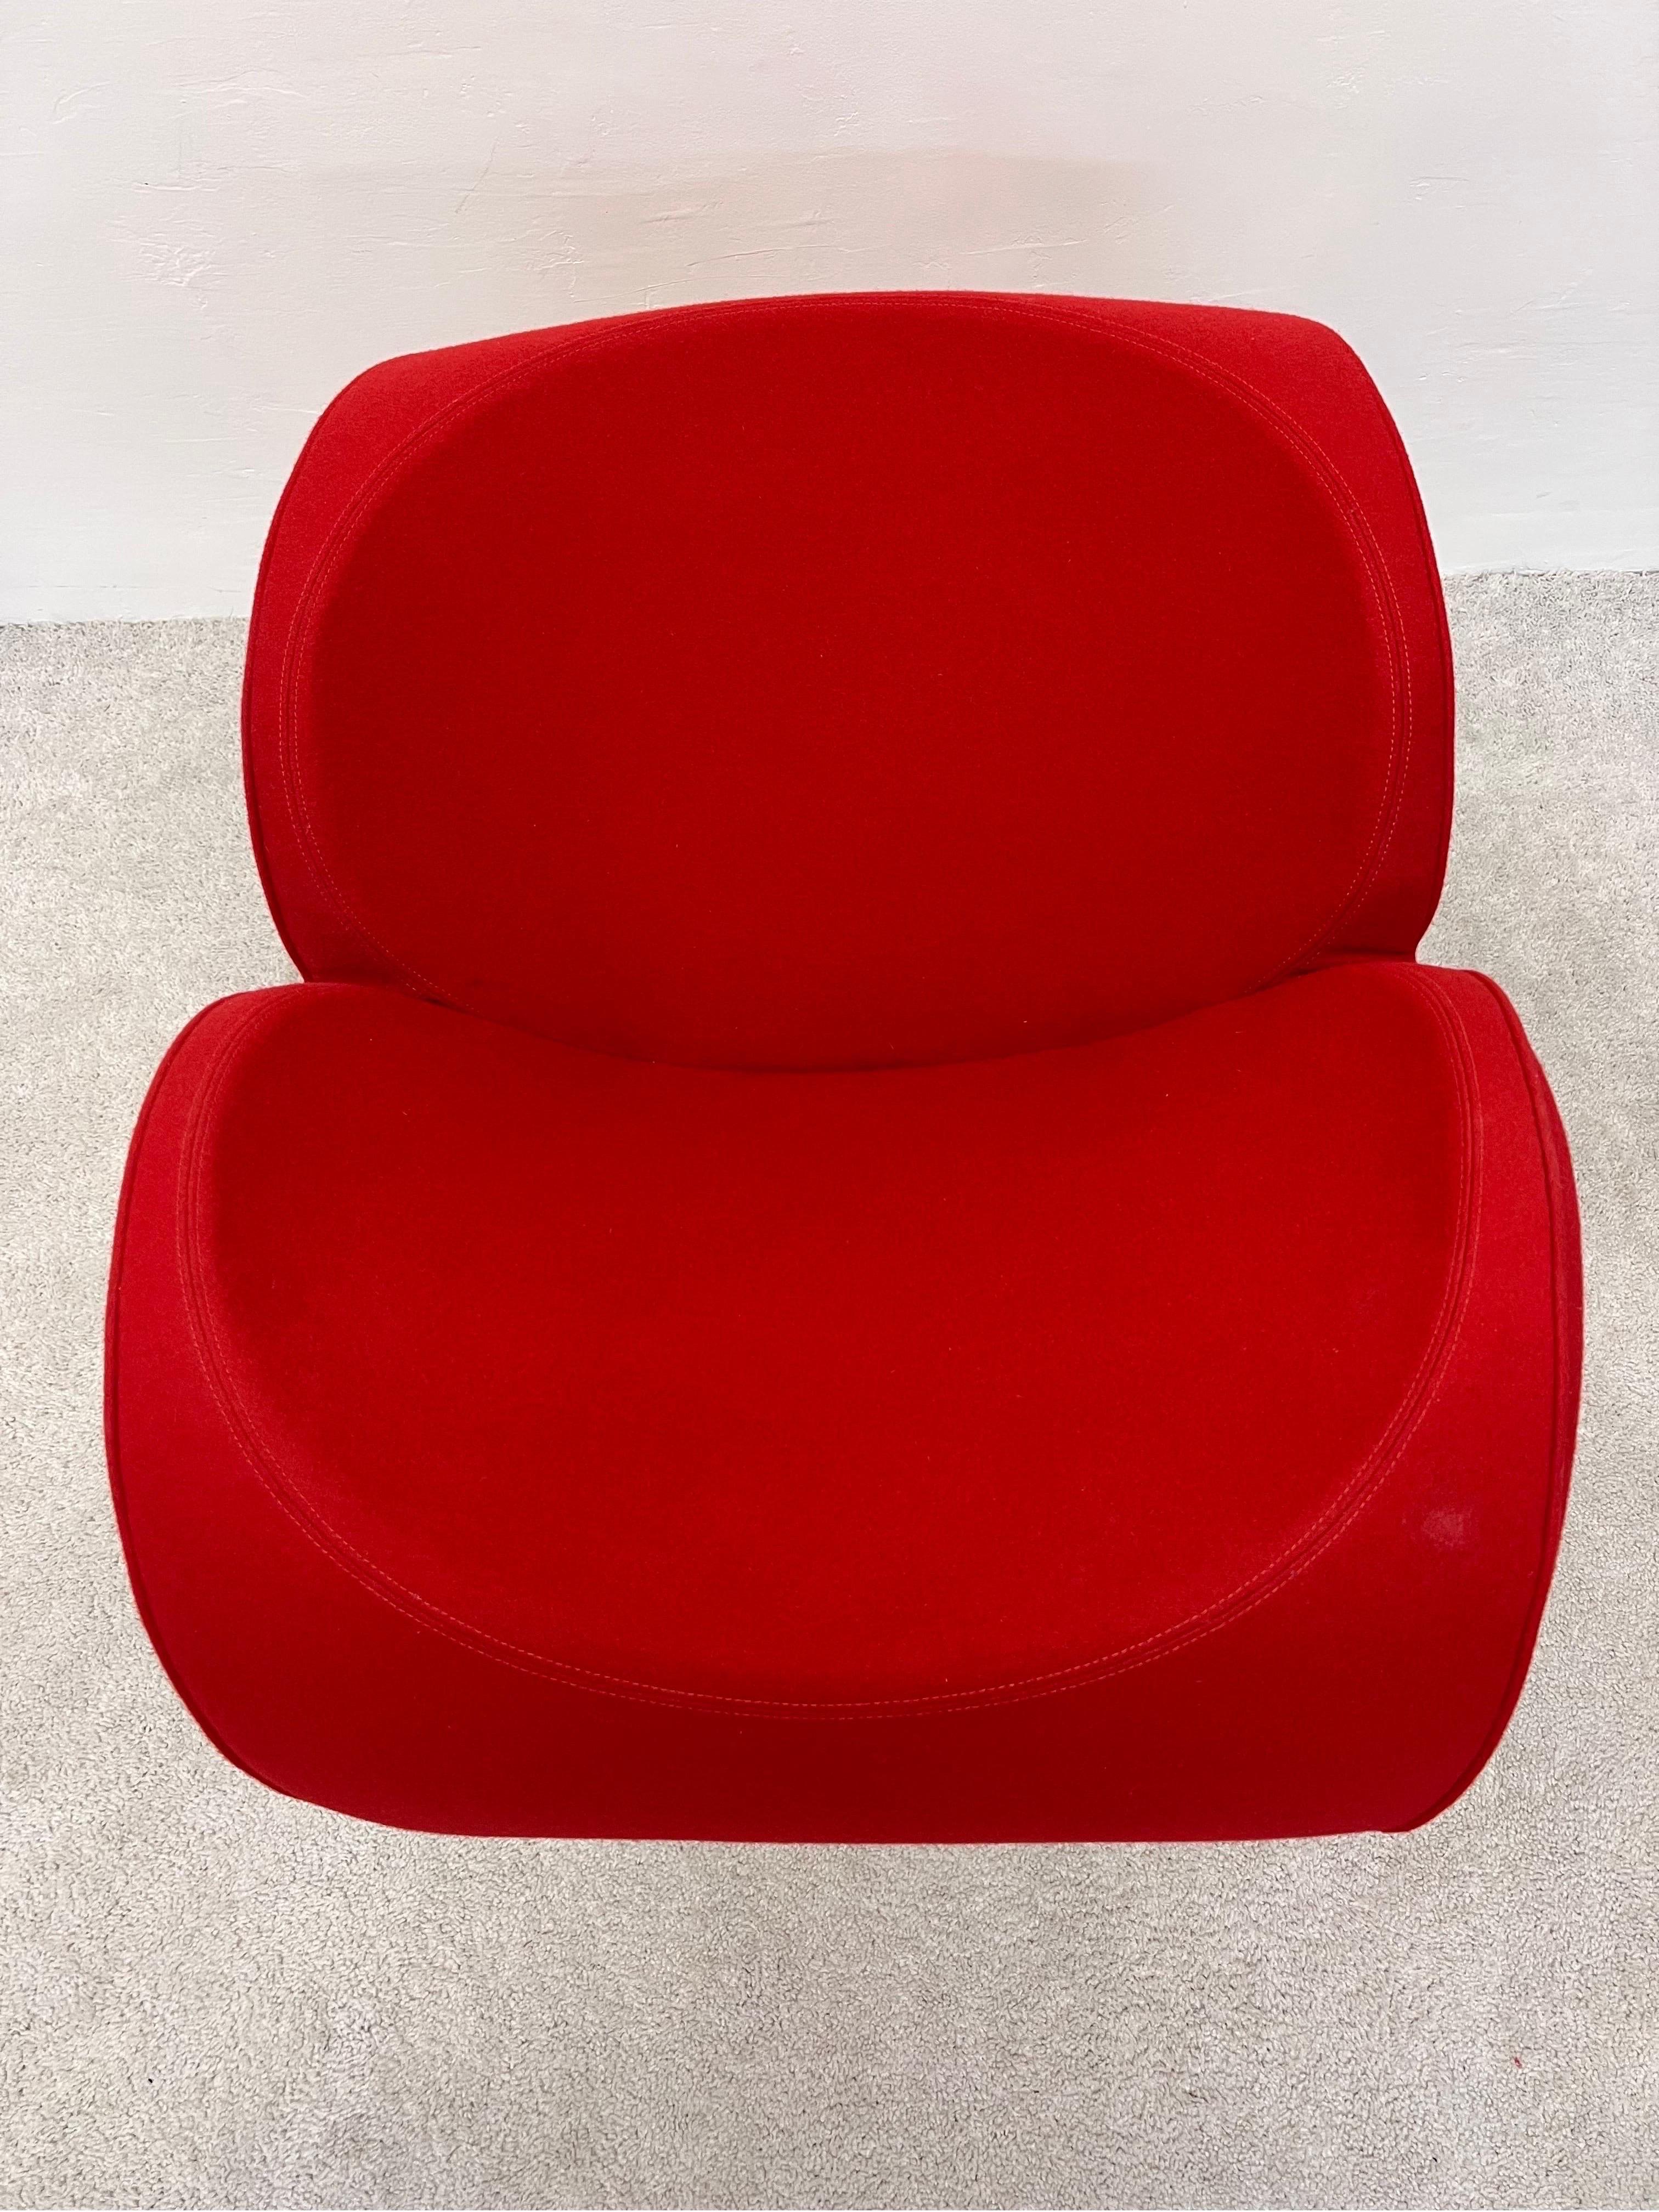 Ron Arad Spring Collection Soft Heart Chair for Moroso For Sale 2